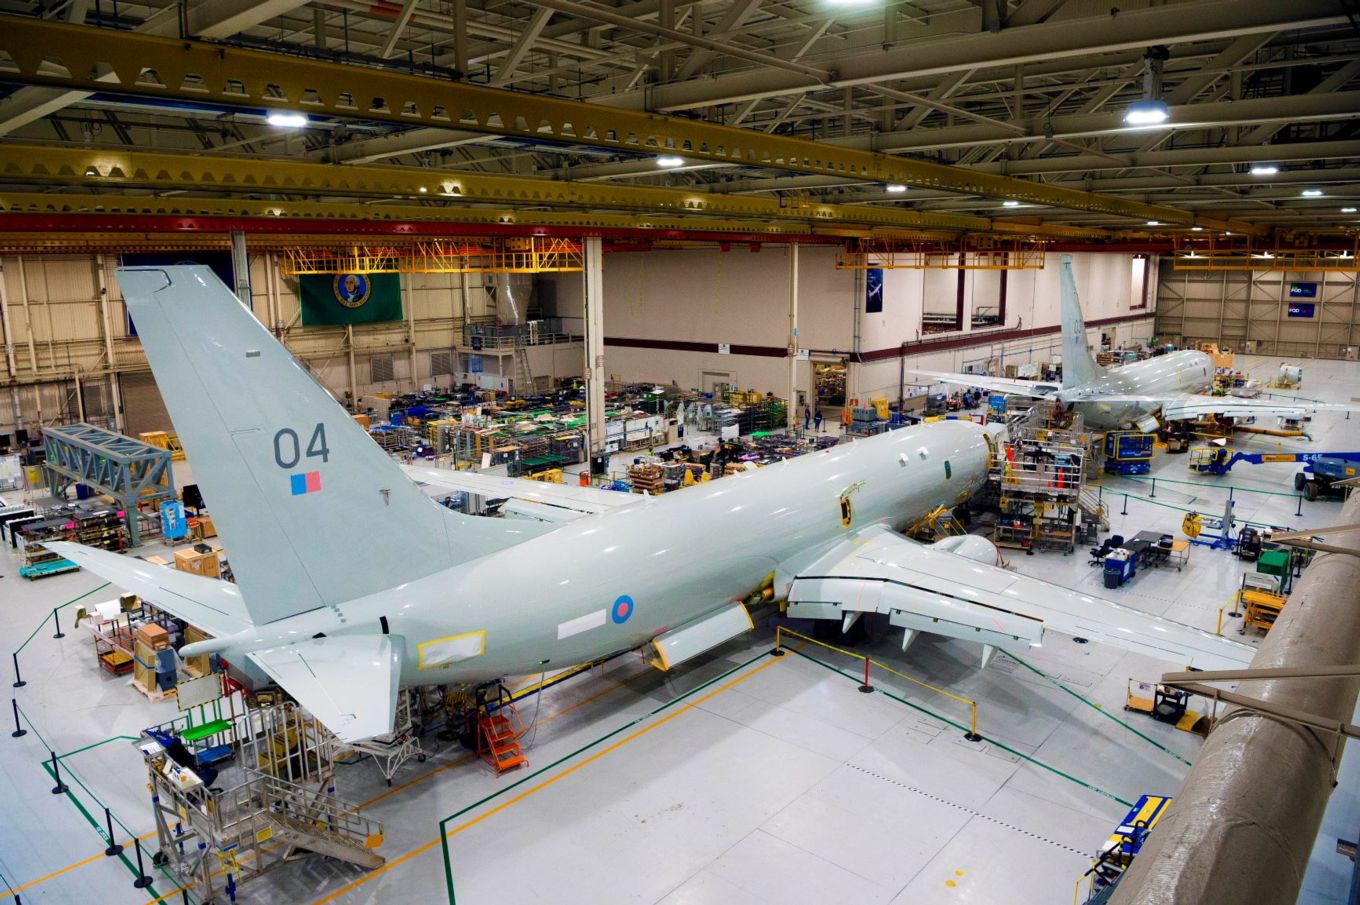 Image shows the Poseidon aircraft in the factory.